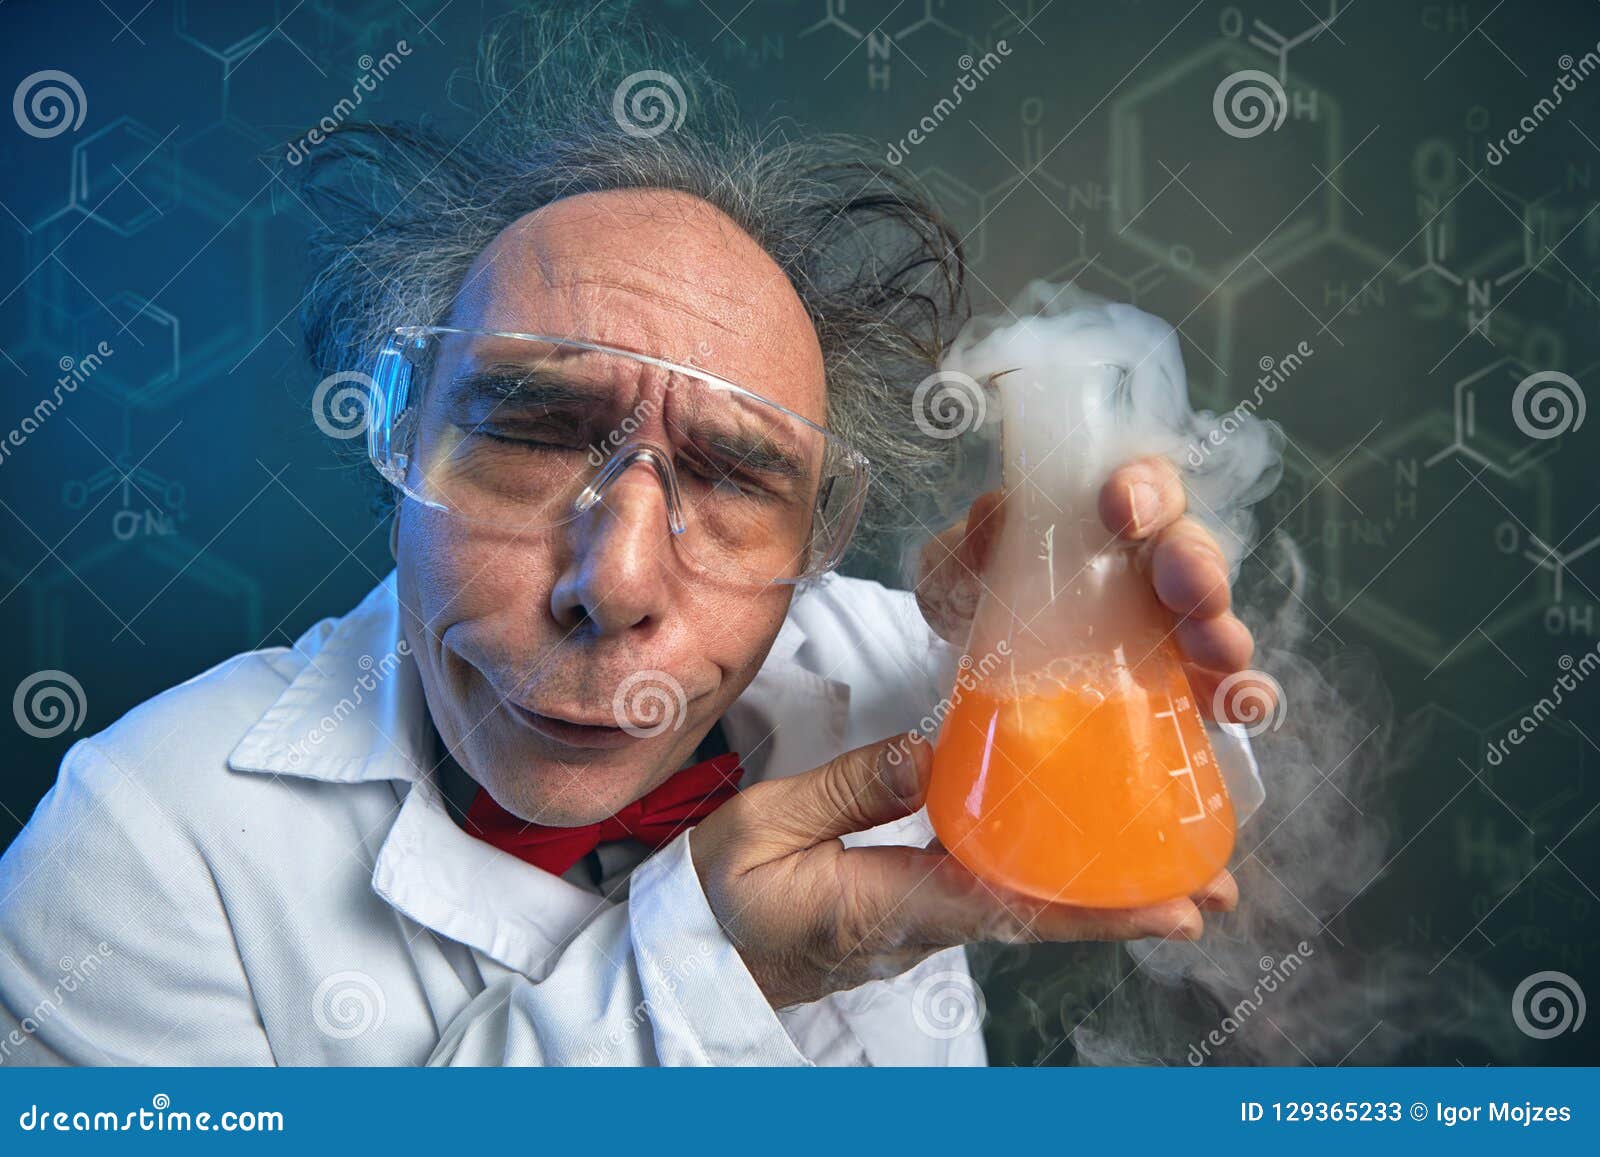 Very funny scientist stock image. Image of microbiology - 129365233